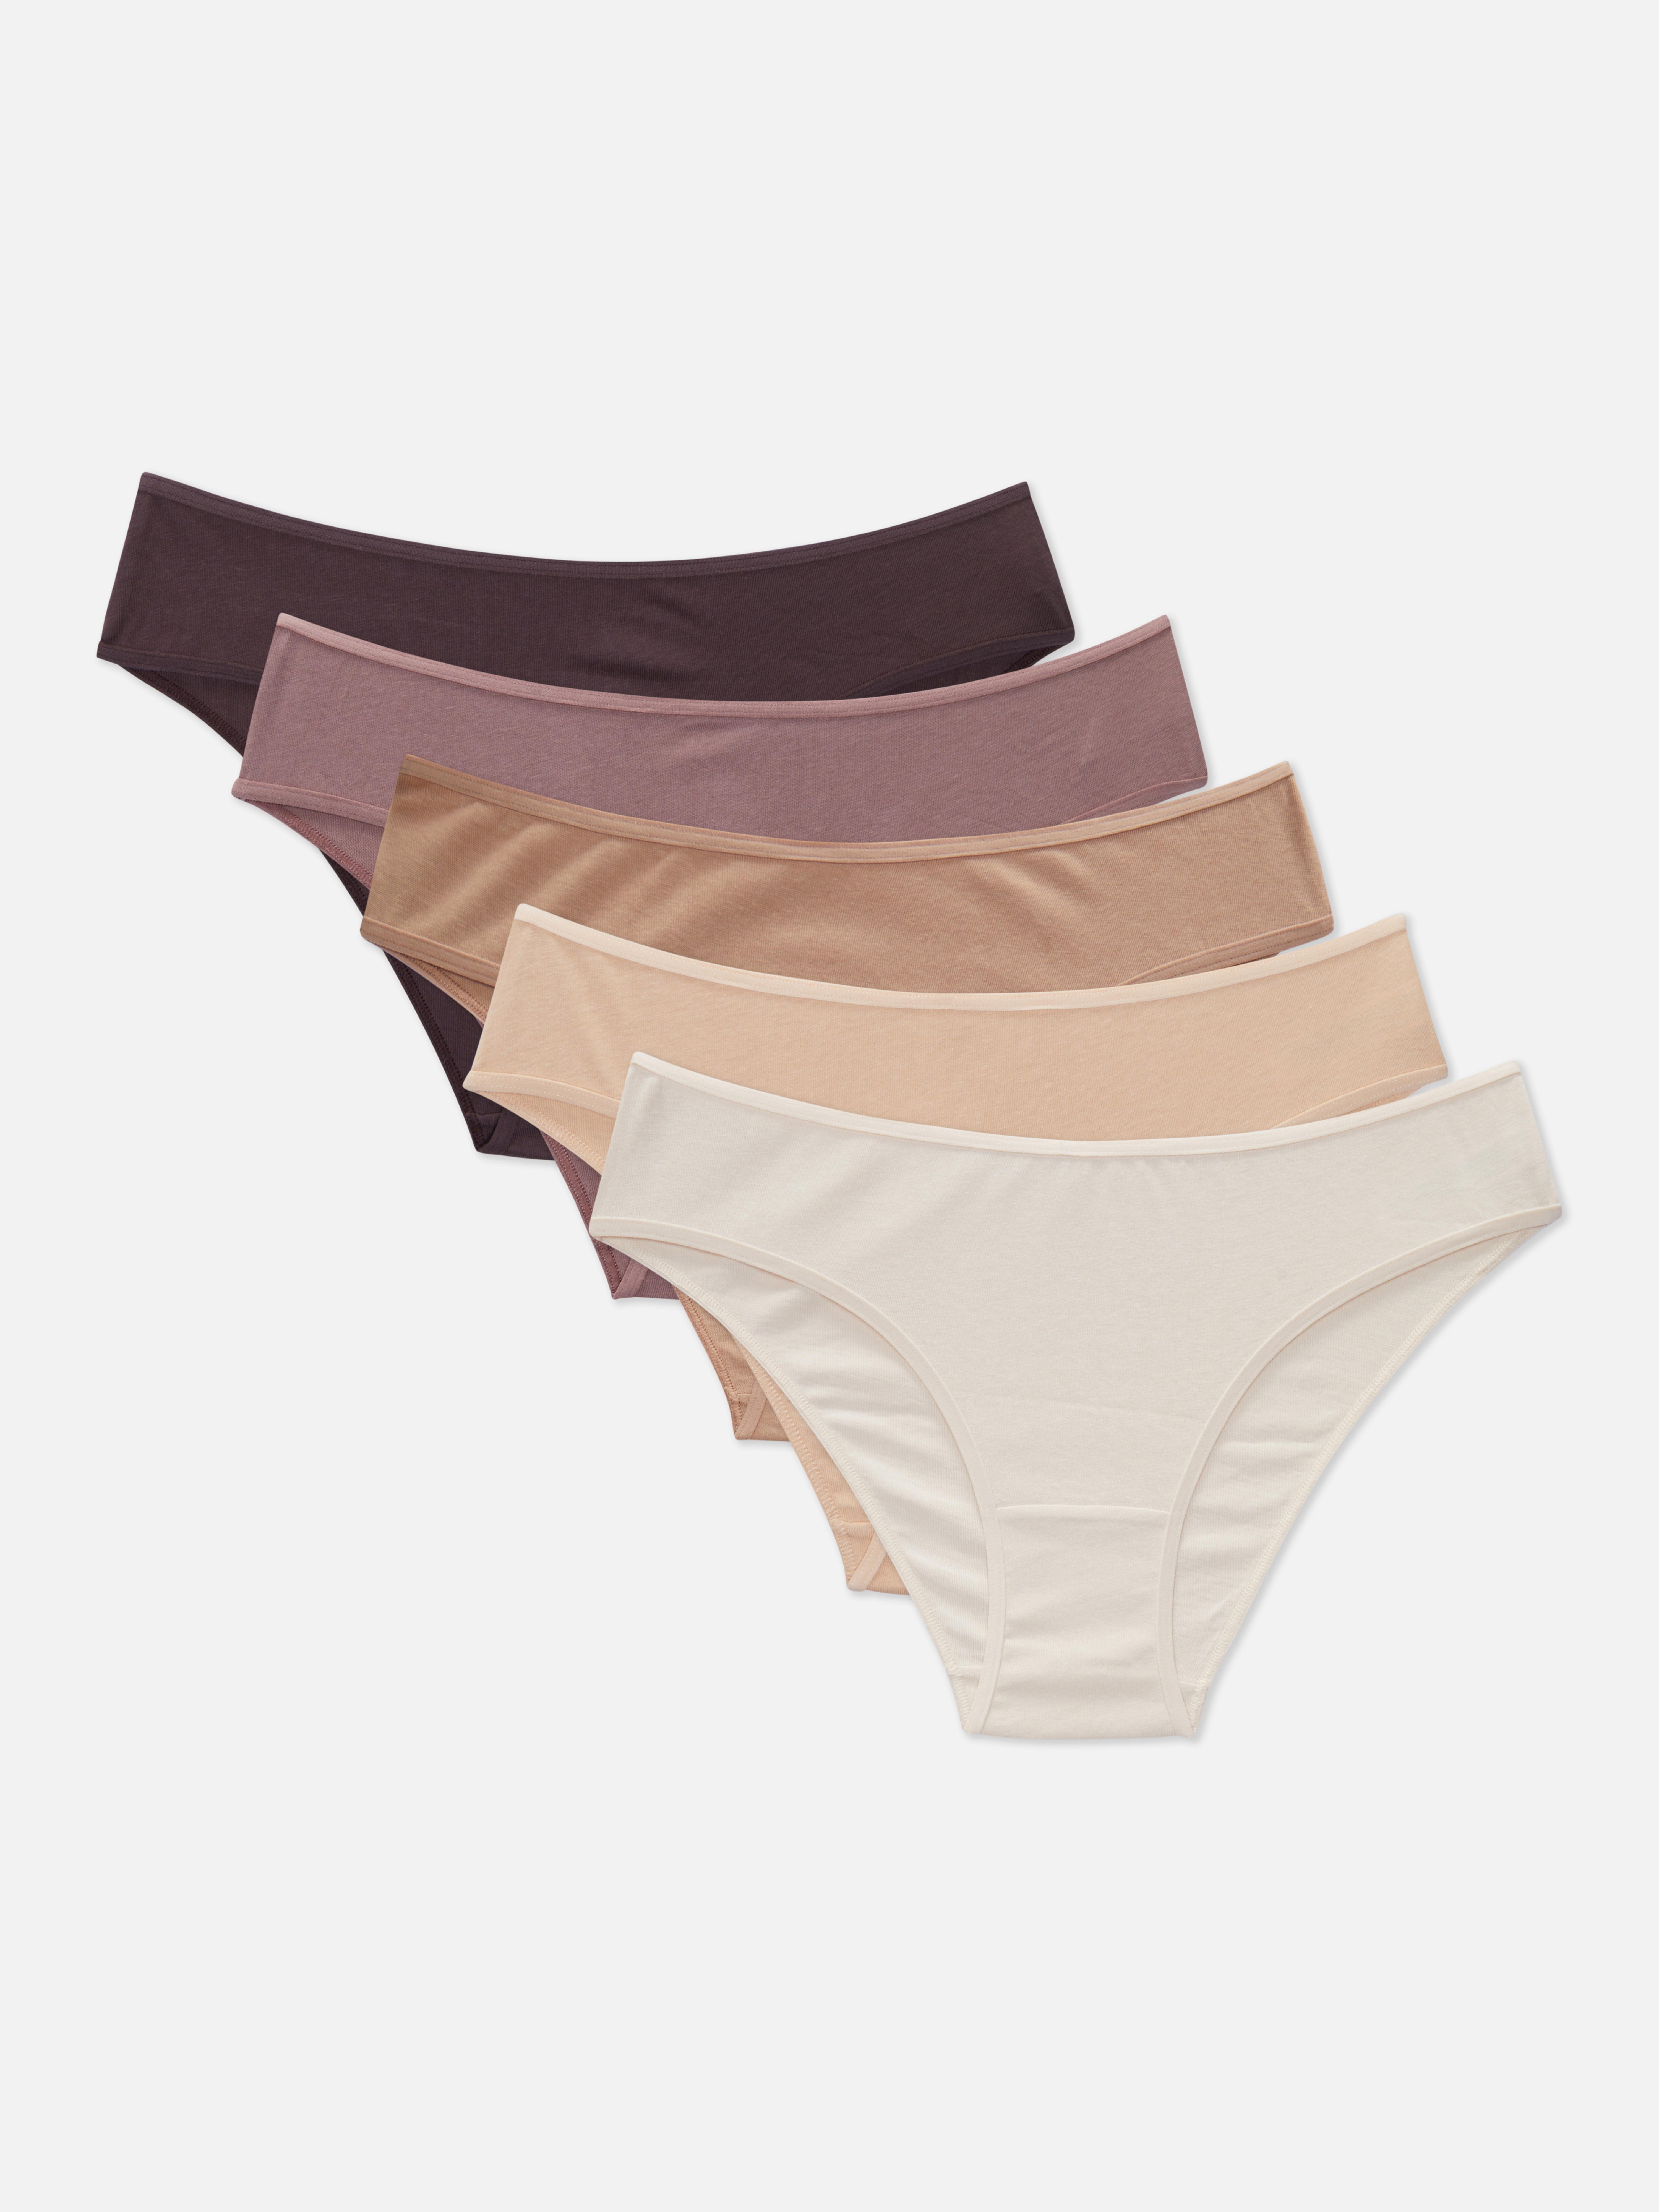 Munching Goot Jumping jack 5-Pack Brazilian Briefs | Briefs & Knickers | Lingerie & Underwear |  Women's Style | Our Womenswear Collections | All Primark Products | Primark